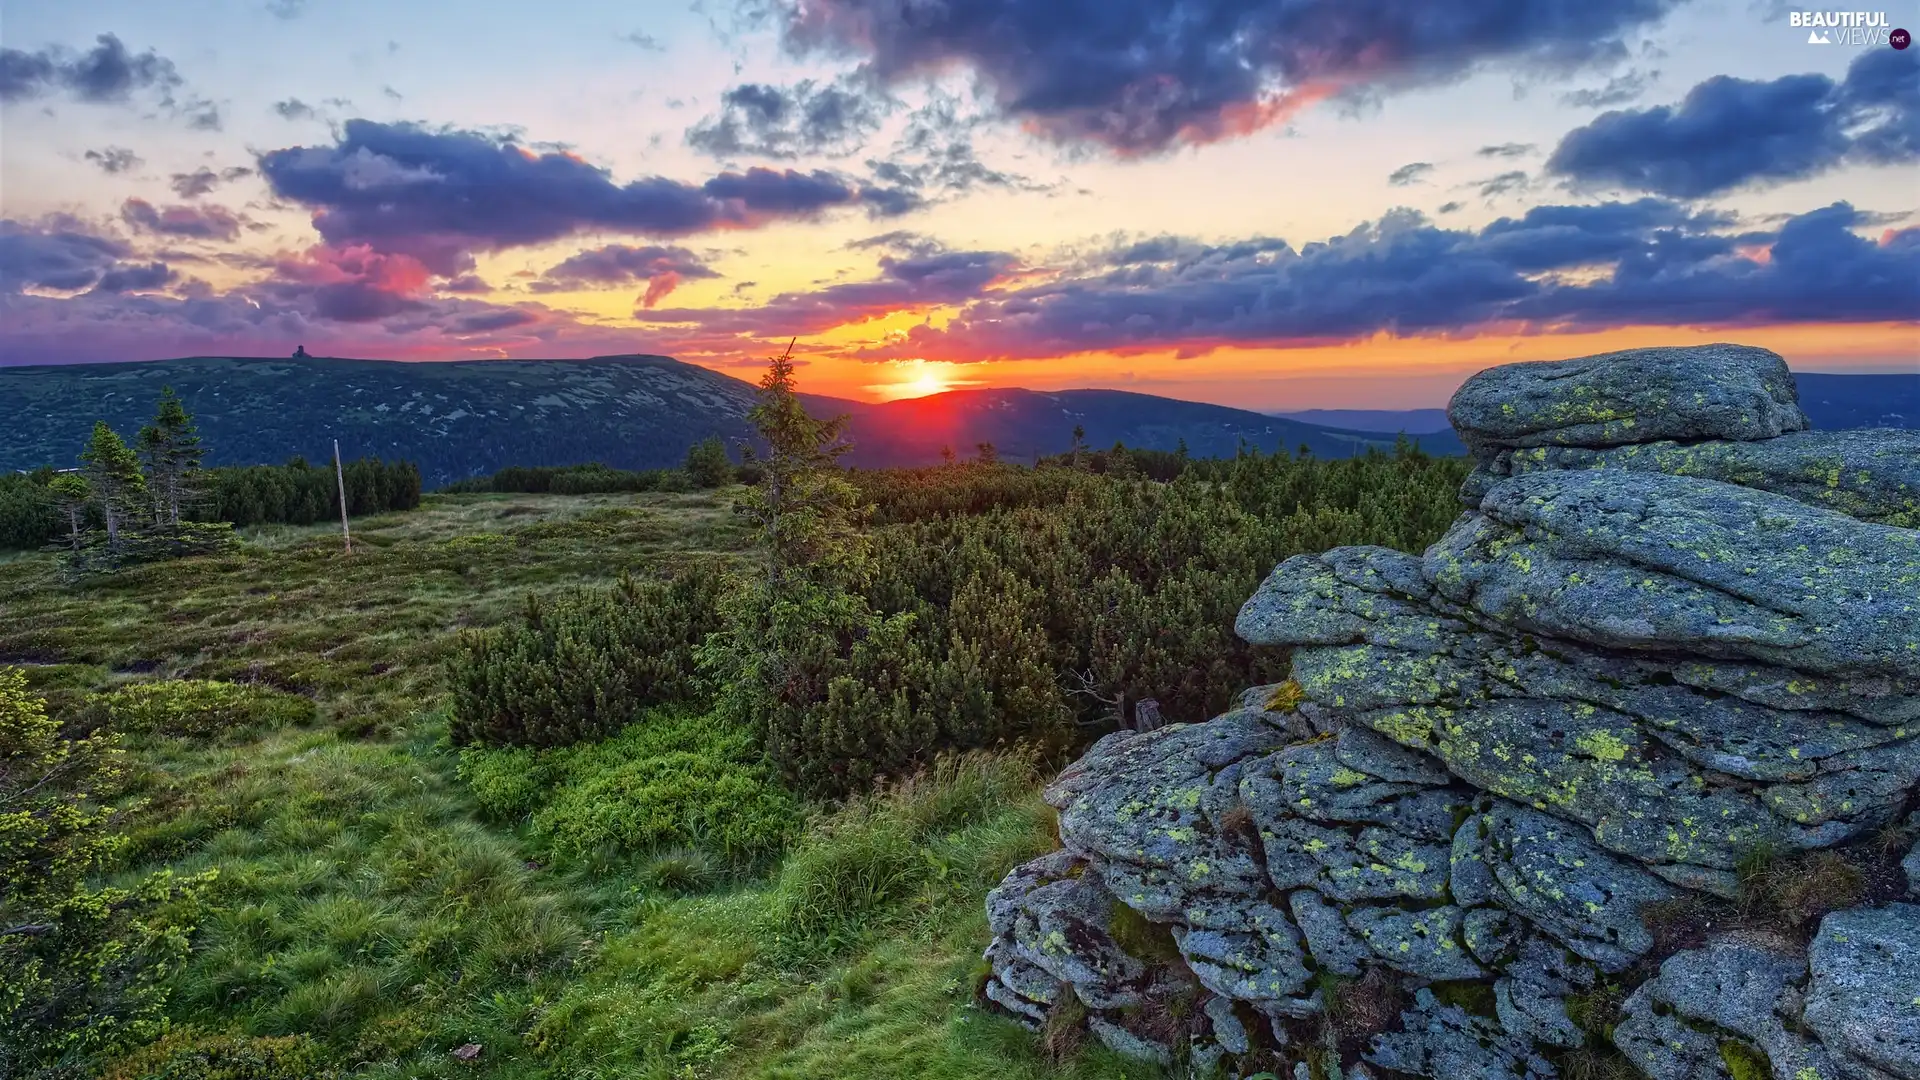 Giant Mountains, clouds, Poland, rocks, viewes, Mountains, Great Sunsets, trees